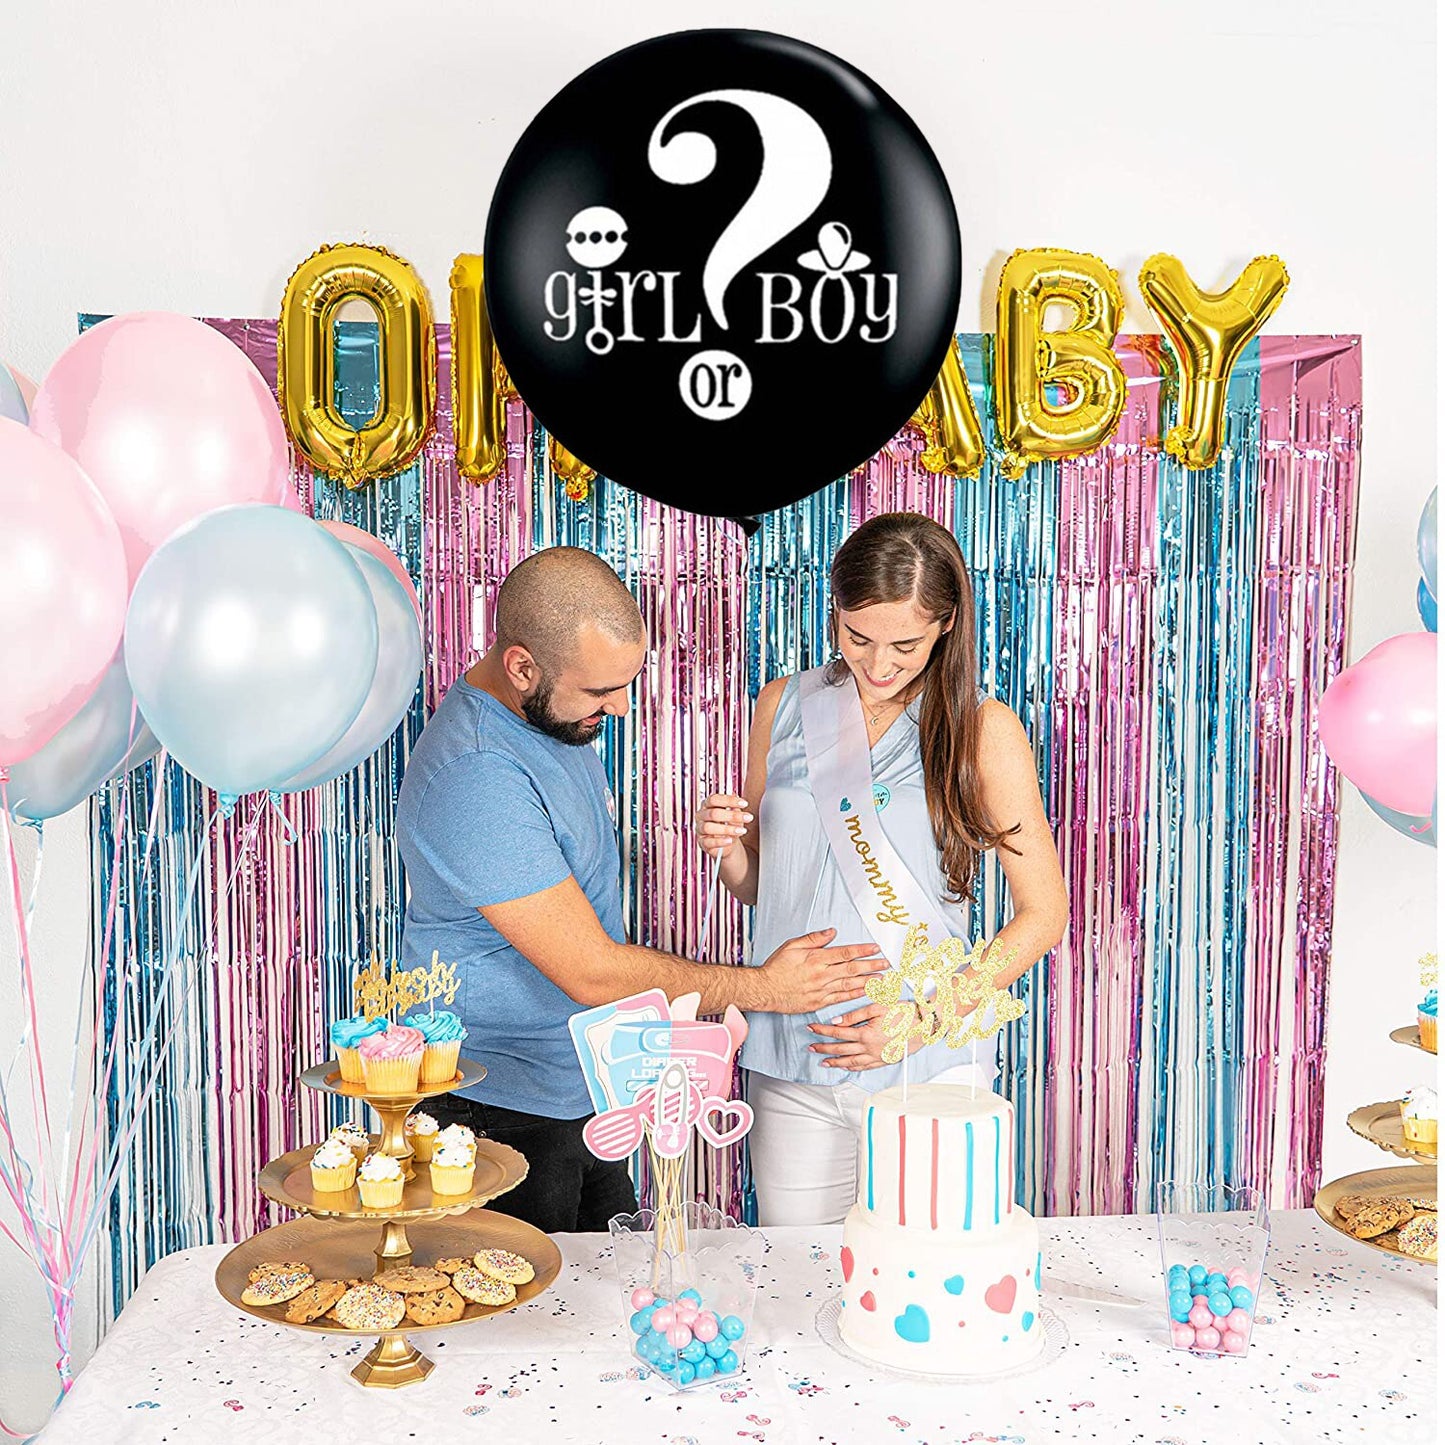 Boy Or Girl Gender Reveal Party Balloons Gender Disclosure Theme Party Decorative Foil Ballon Baby Shower Supplies Decoration